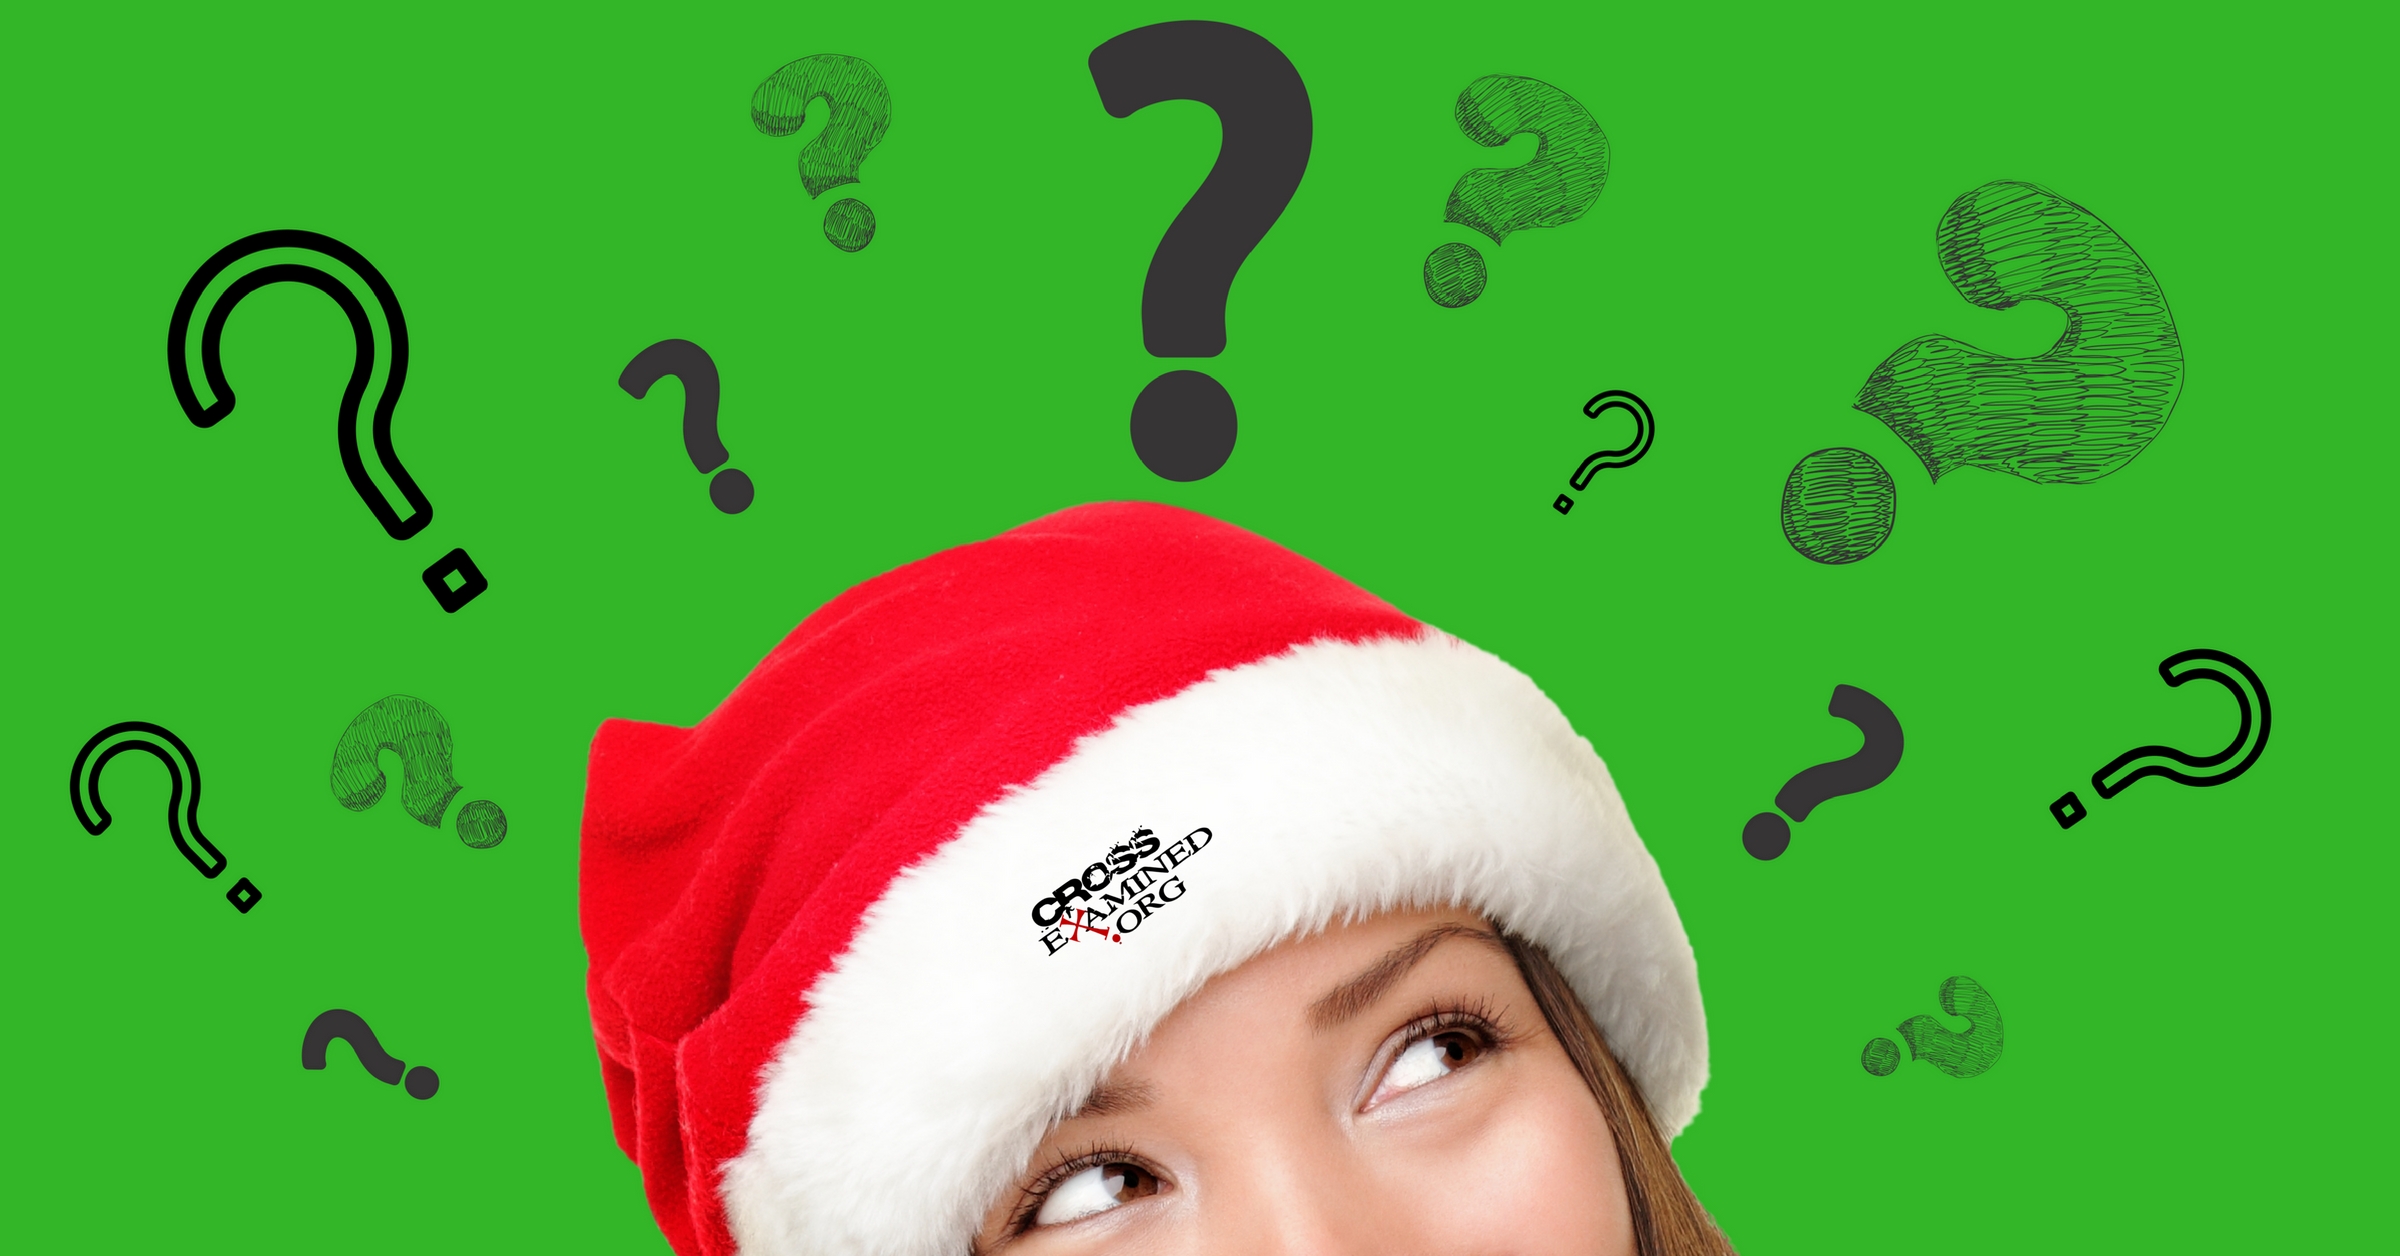 Christmas Questions